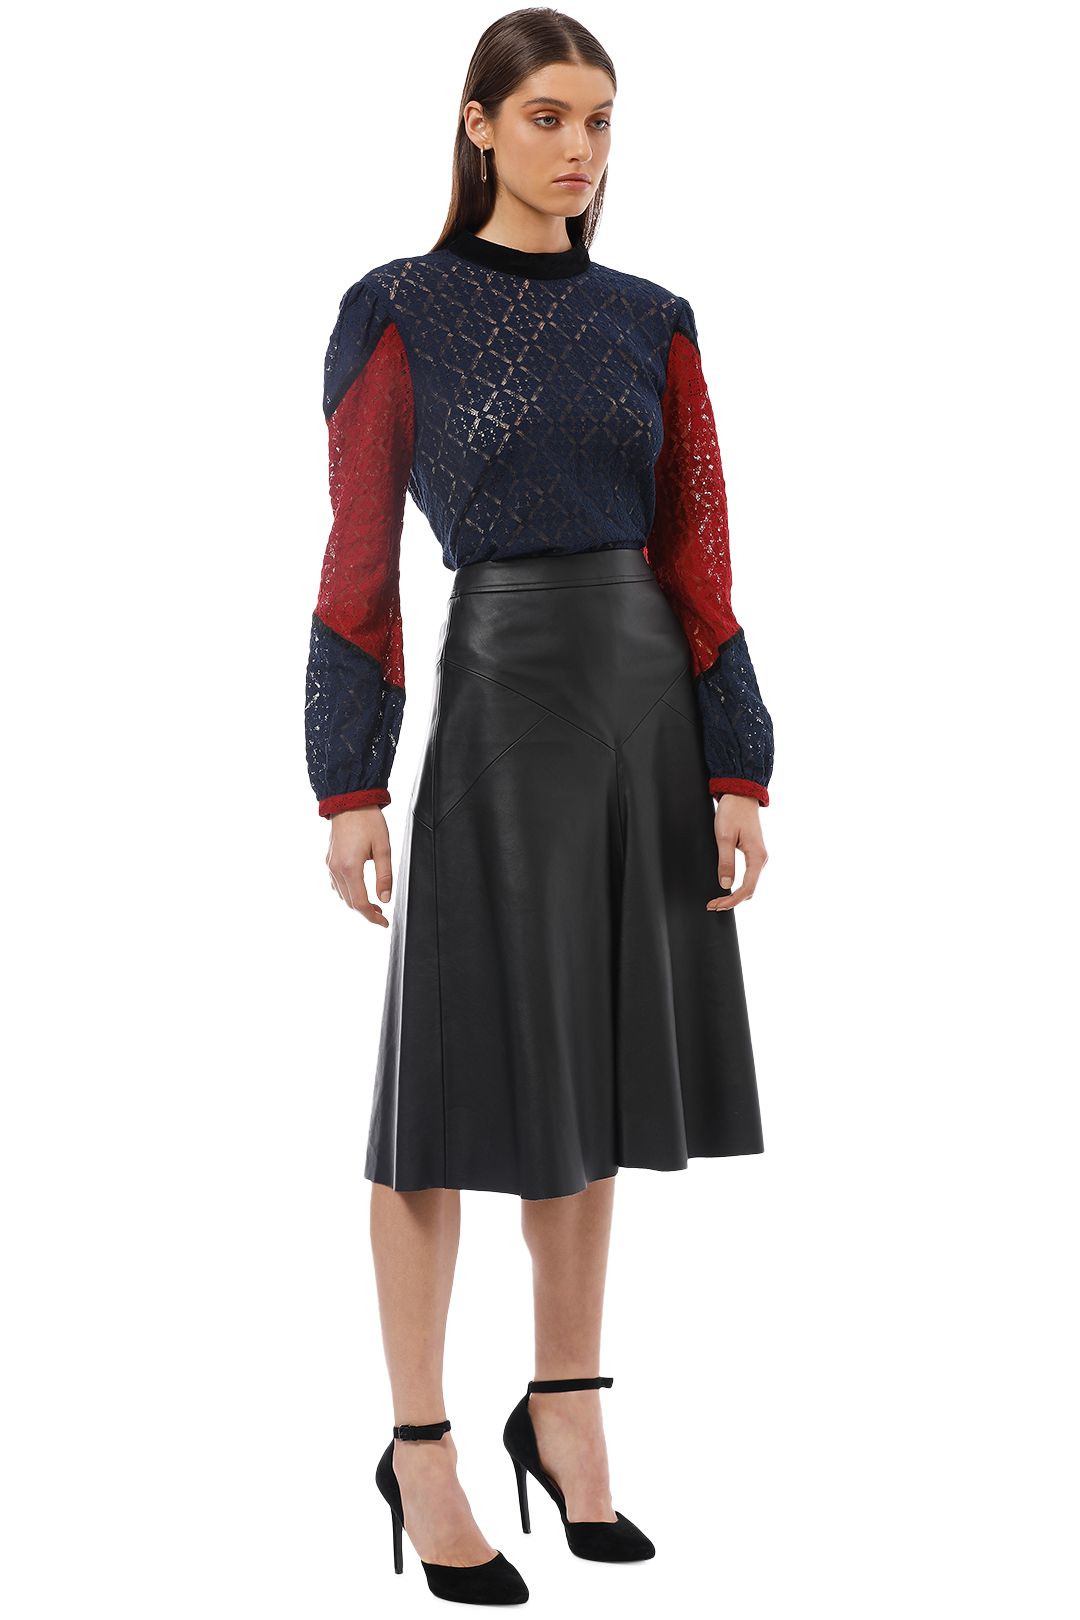 Gysette - Asilah Splice Lace Top - Navy Red - Side